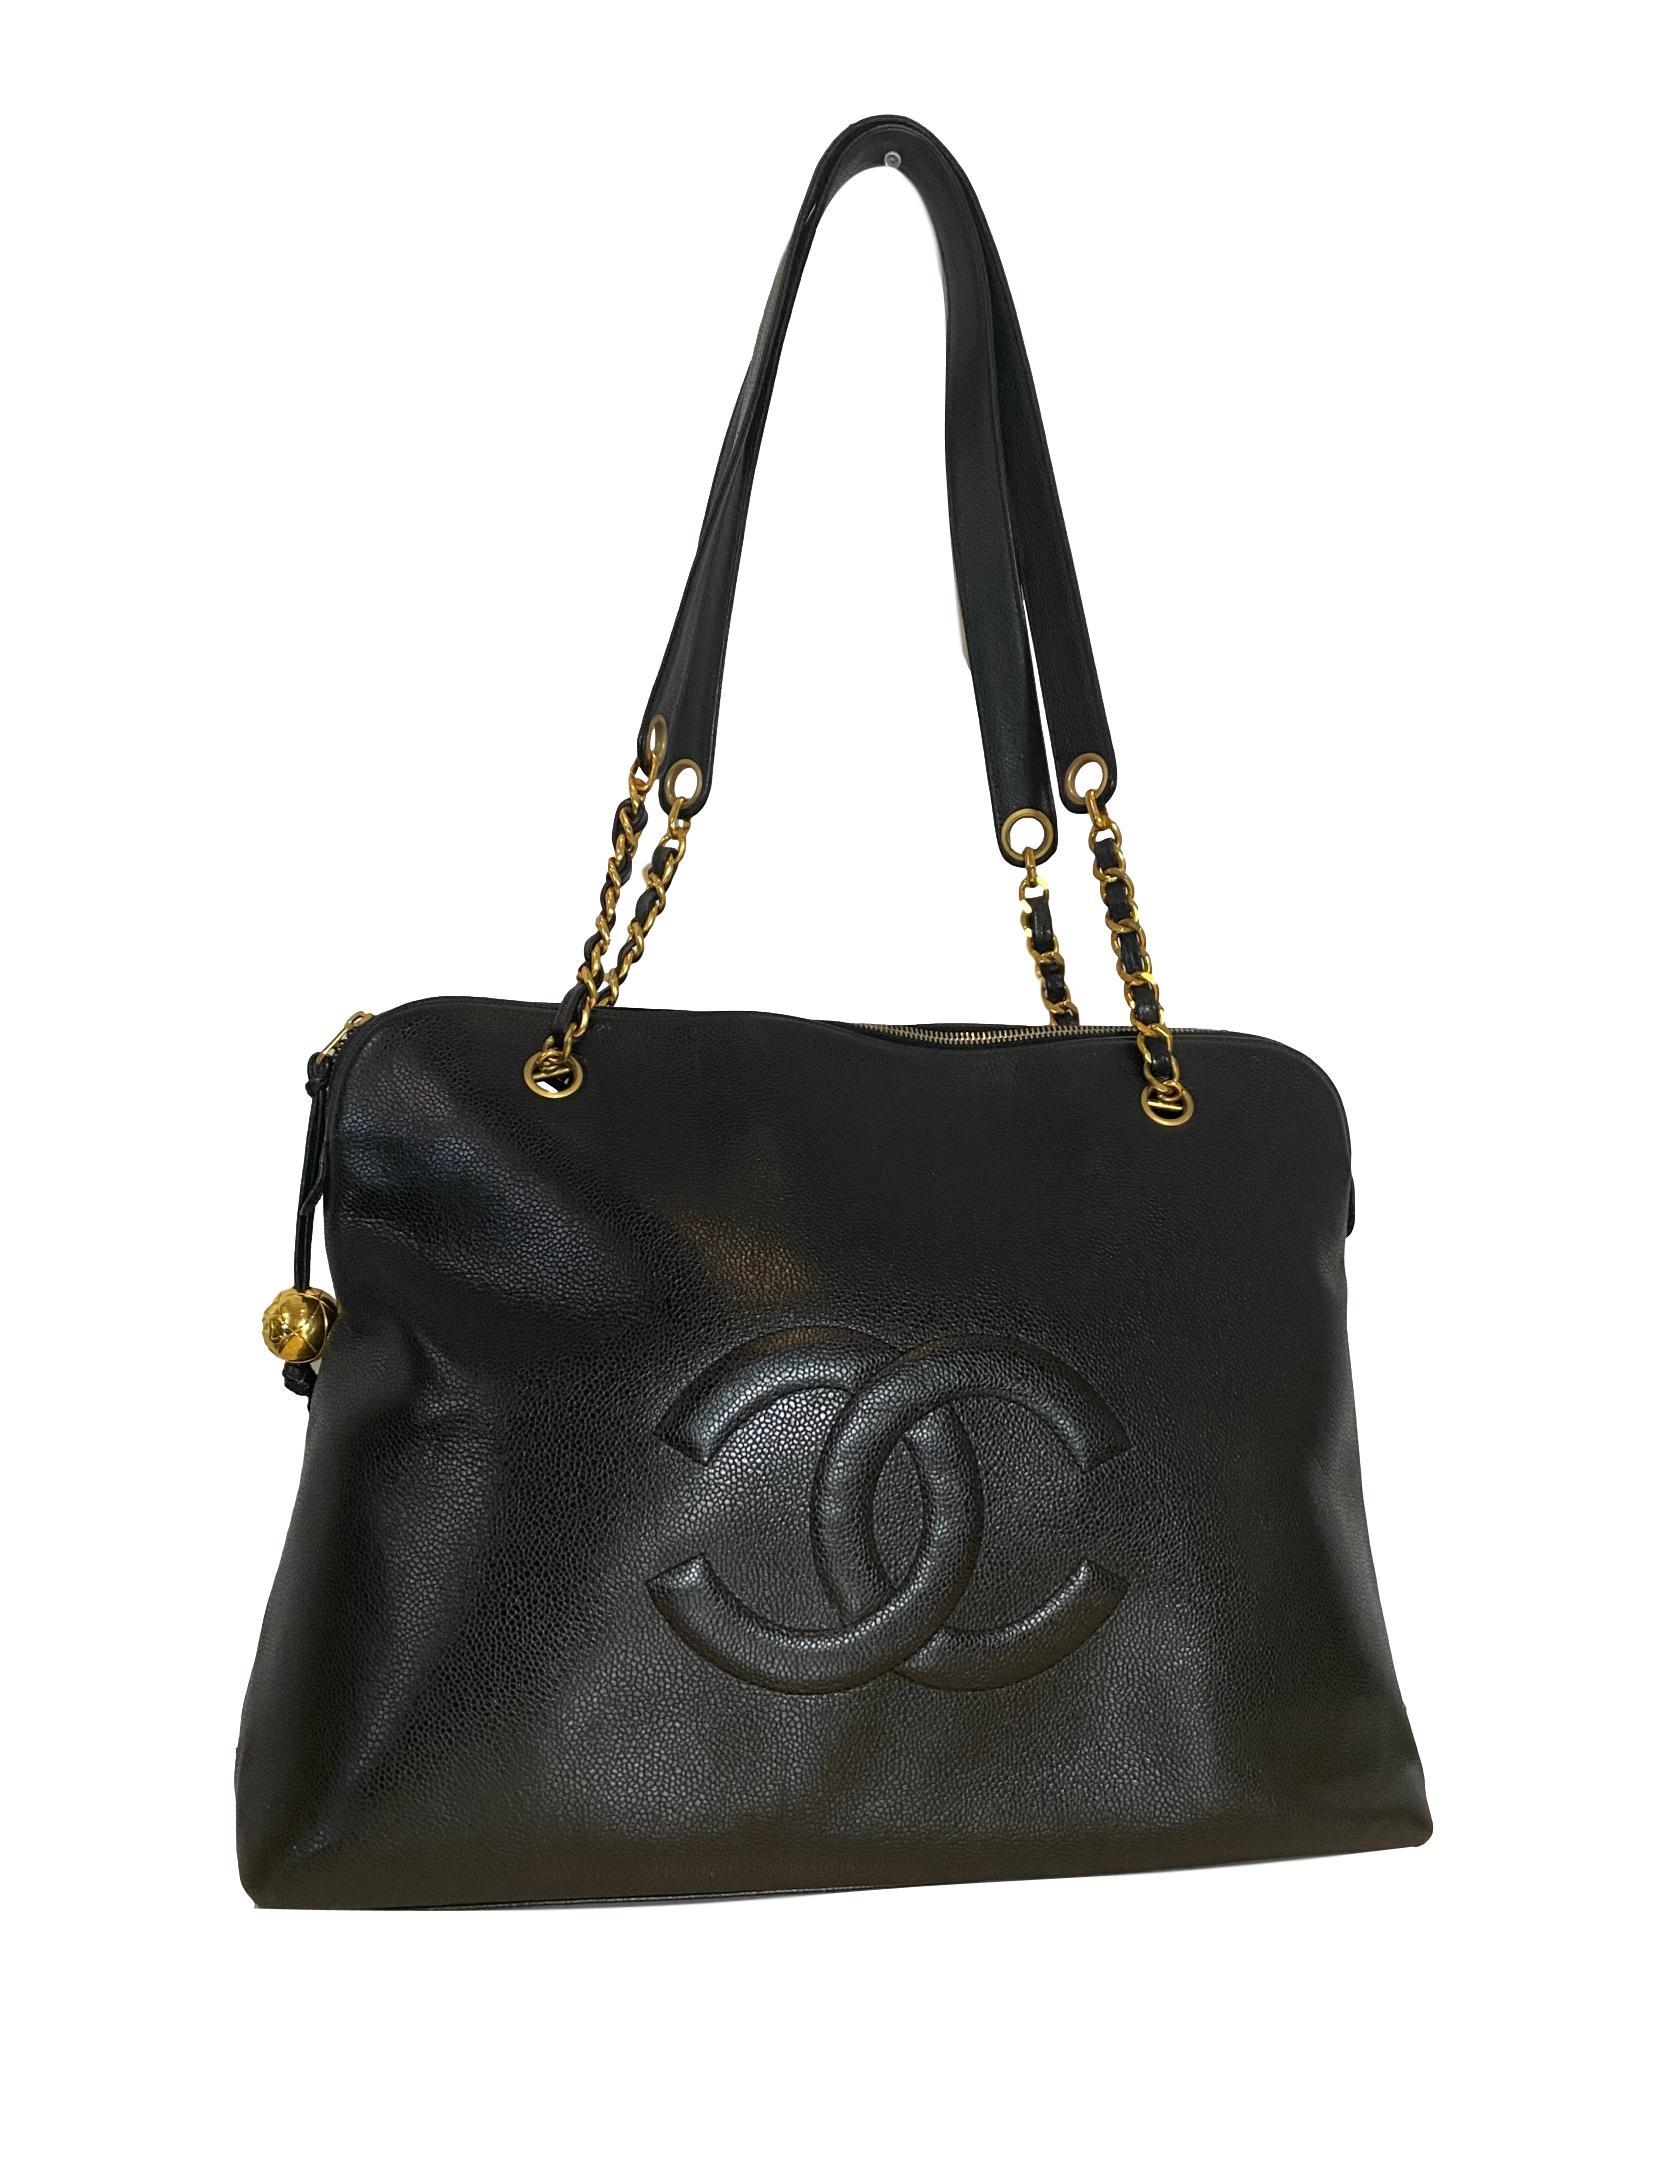 Vintage 1990's Timeless Large Black Leather Tote in Black Caviar Leather, circa 1994. Crafted from black caviar leather, this classic Chanel Logo tote bag features chain and leather straps, a top zip fastening, and a signature interlocking Chanel